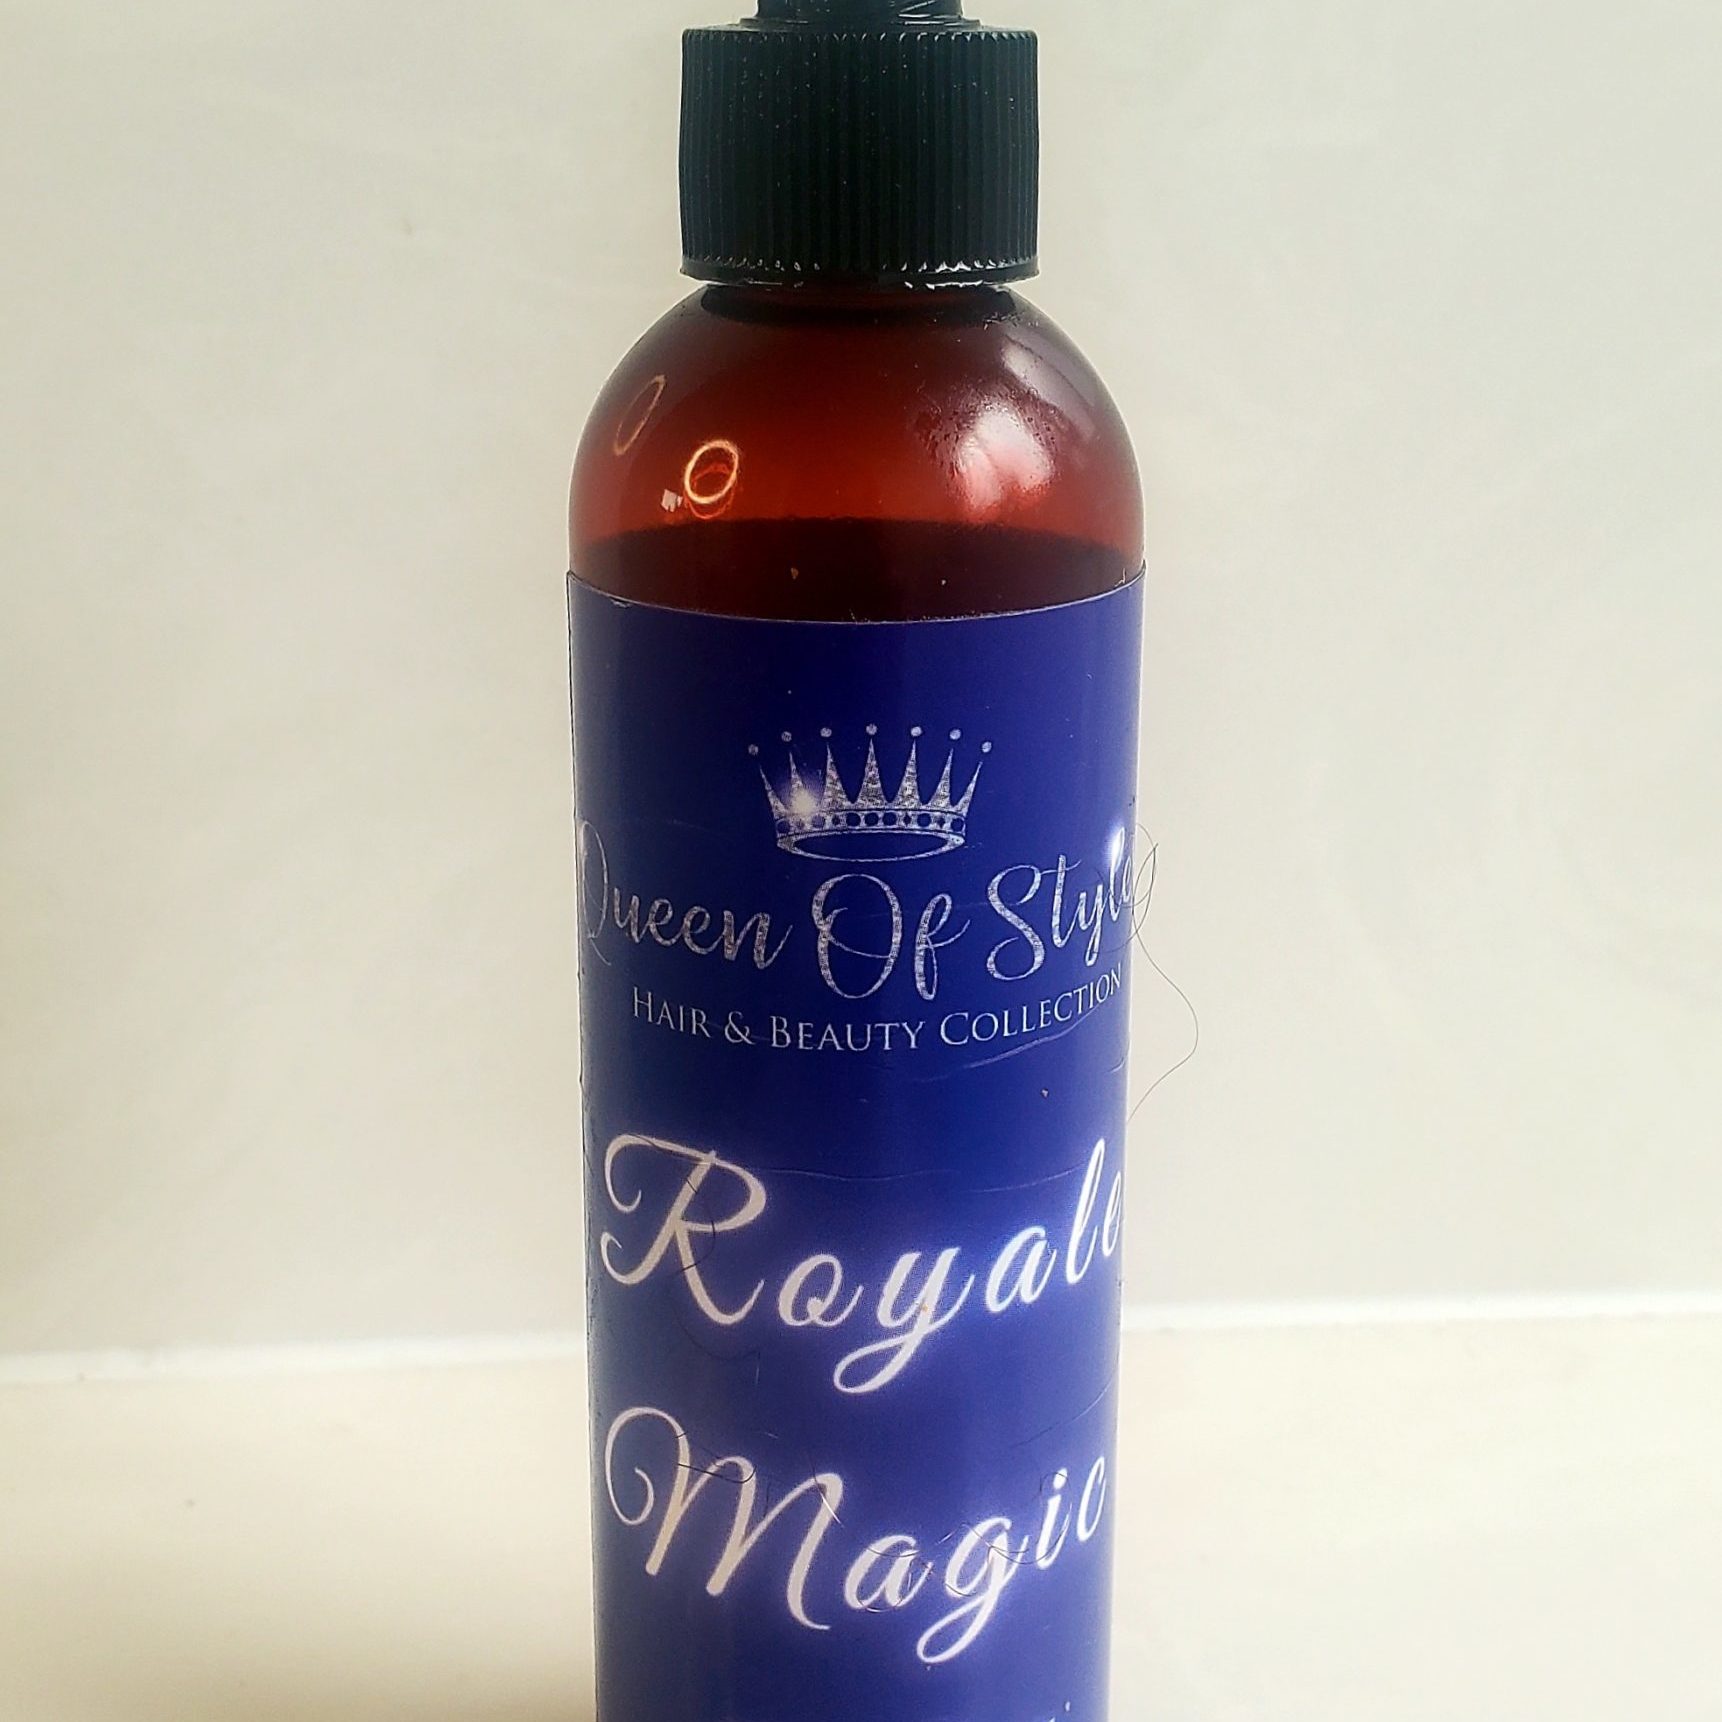 Royale Mgic by queen of styles